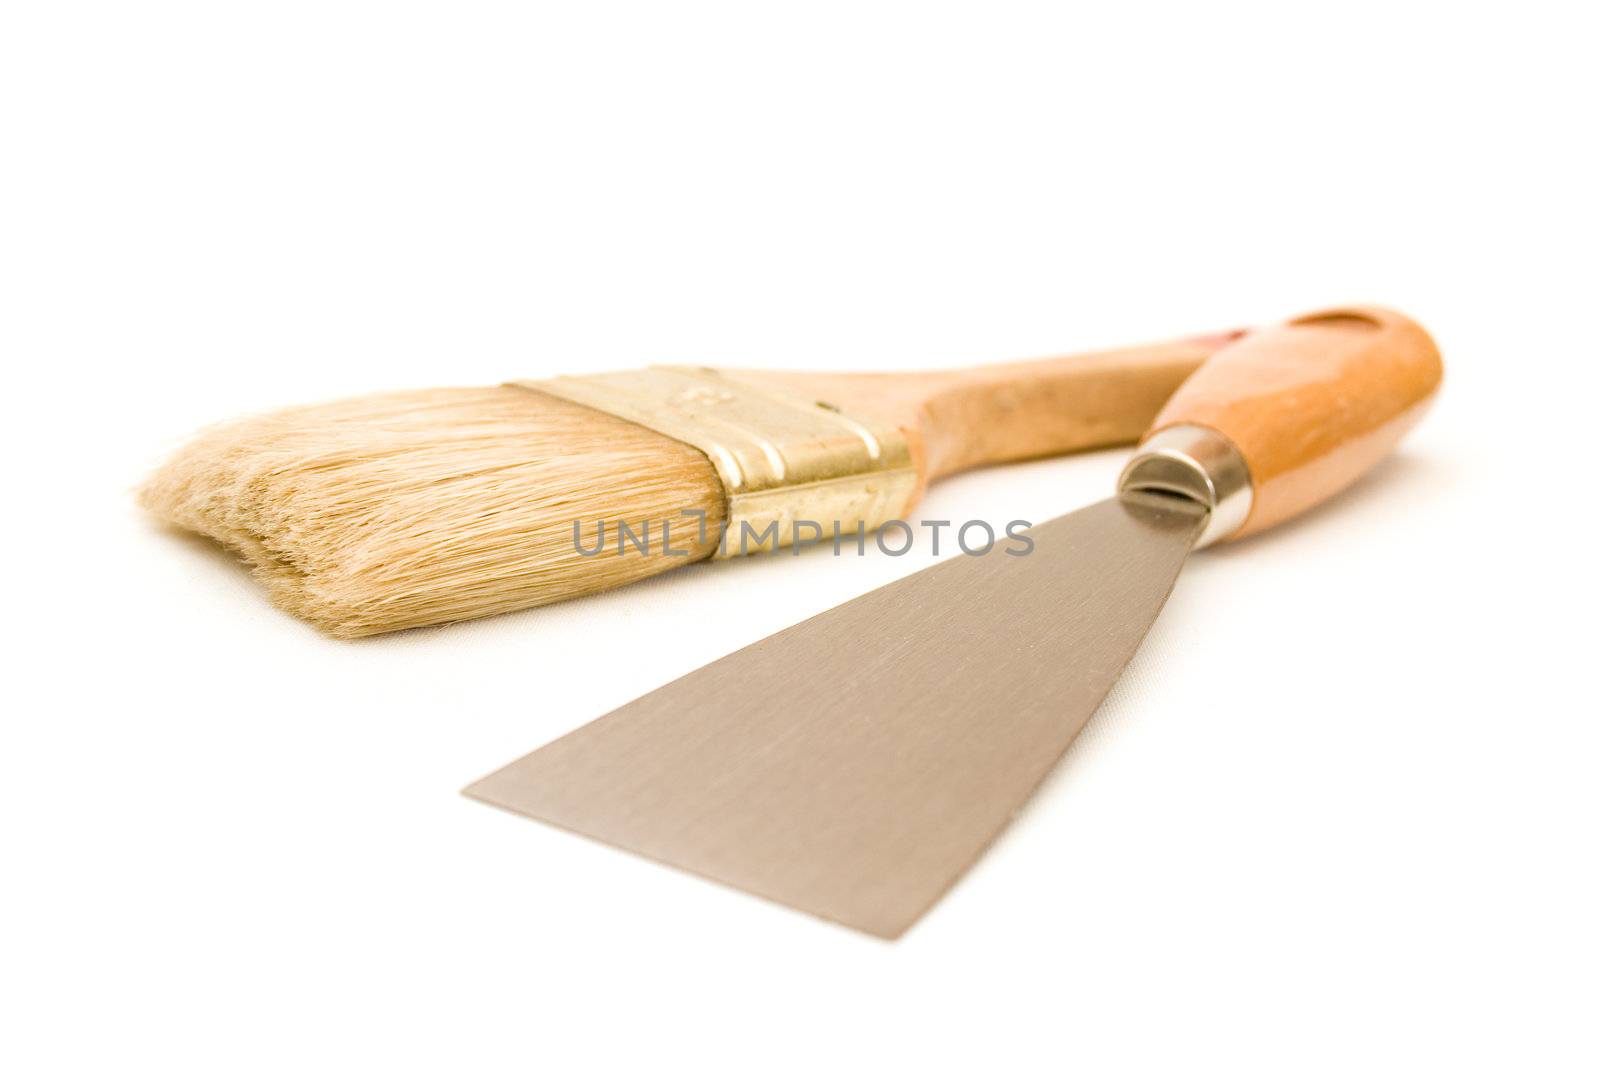 Paintbrush and putty knife by nubephoto